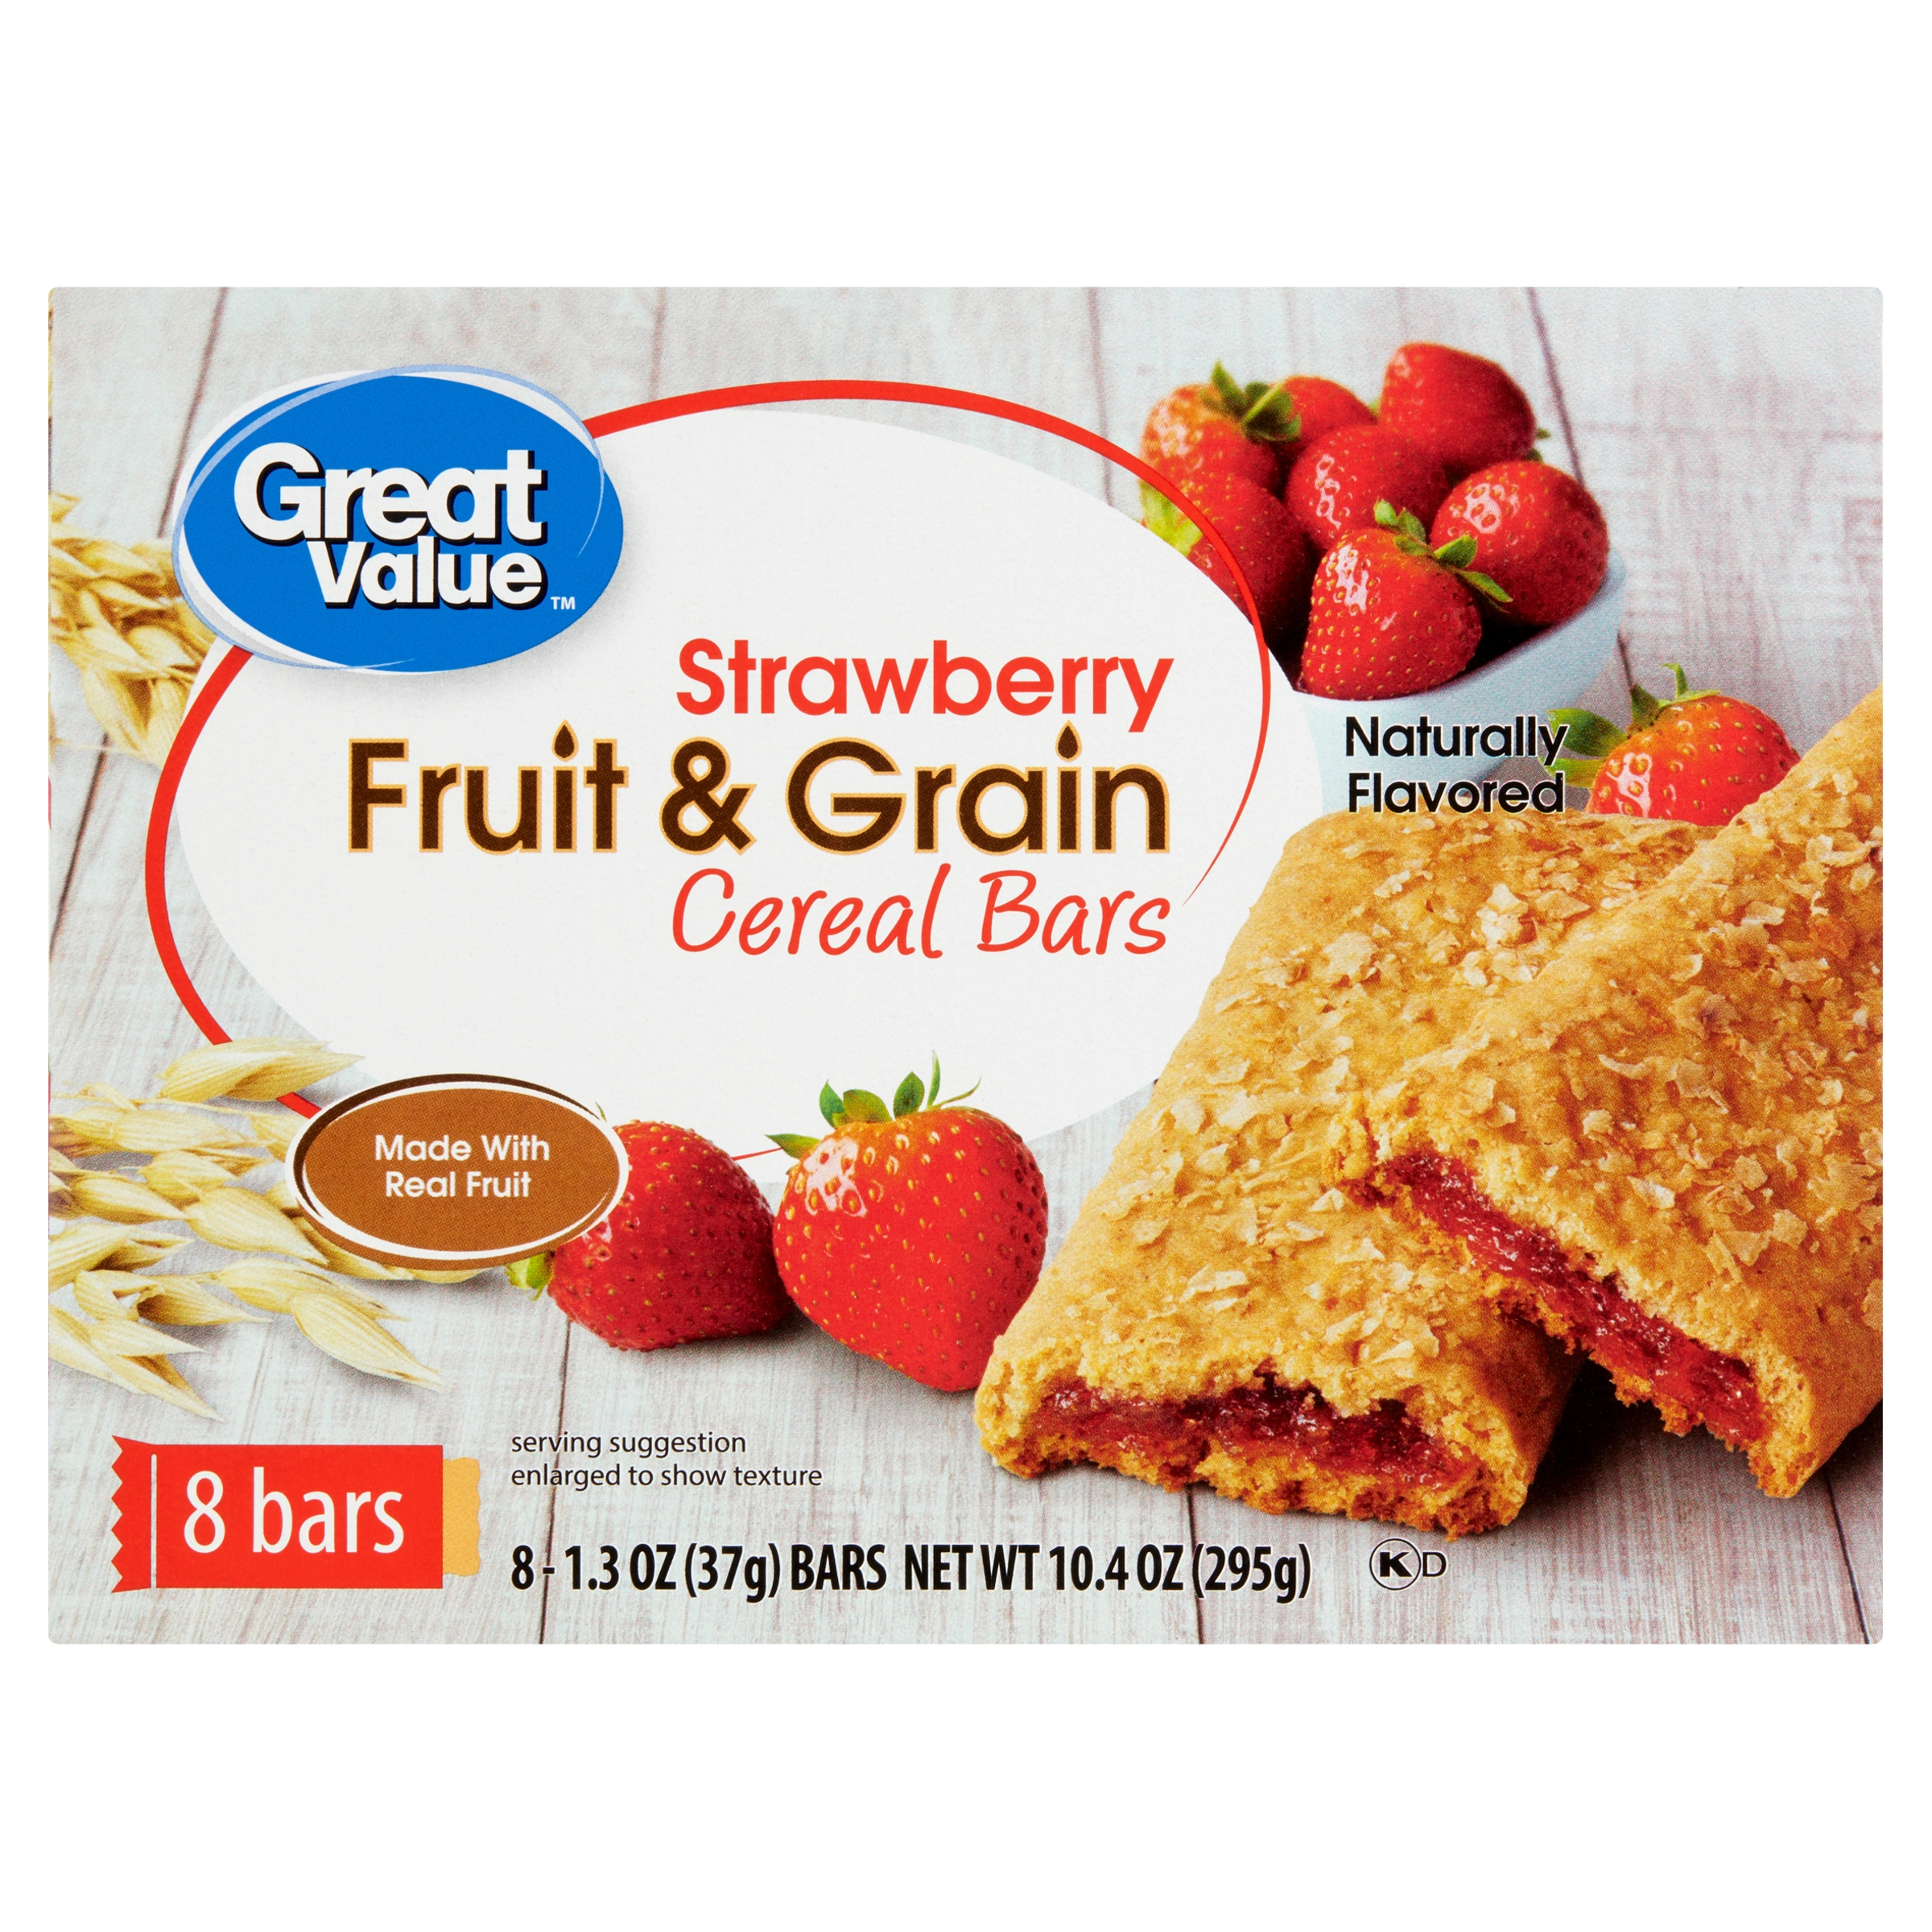 Great Value Fruit & Grain Cereal Bars, Strawberry, 1.3 oz, 8 Count - image 1 of 8